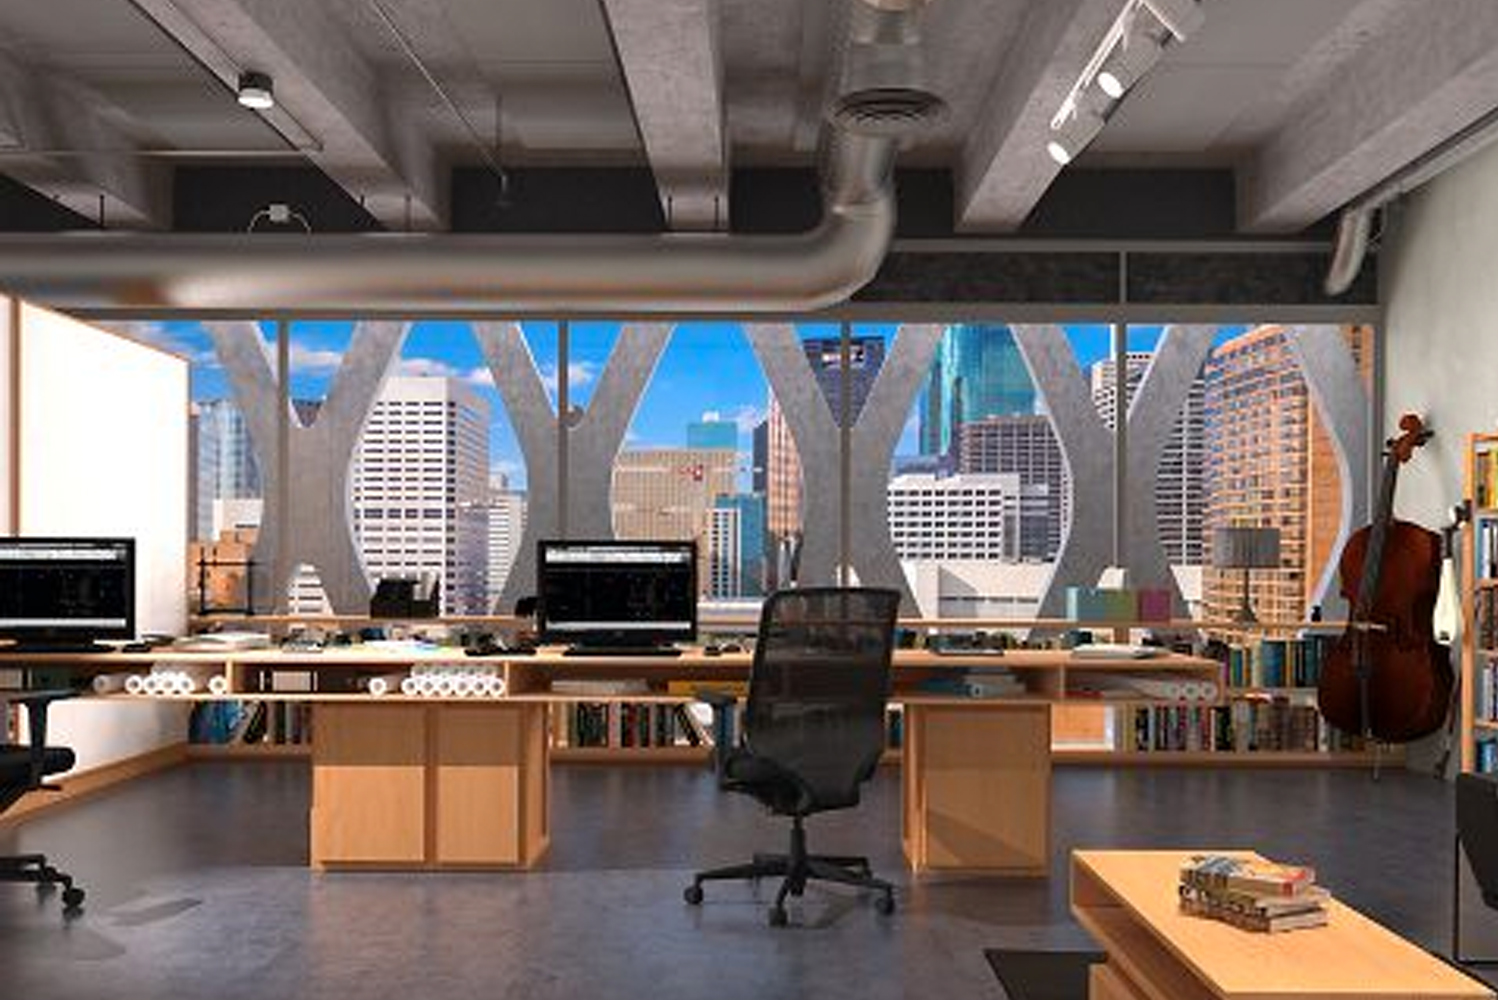 Armstrong Ceilings and Wall Solutions launched Invisacoustics